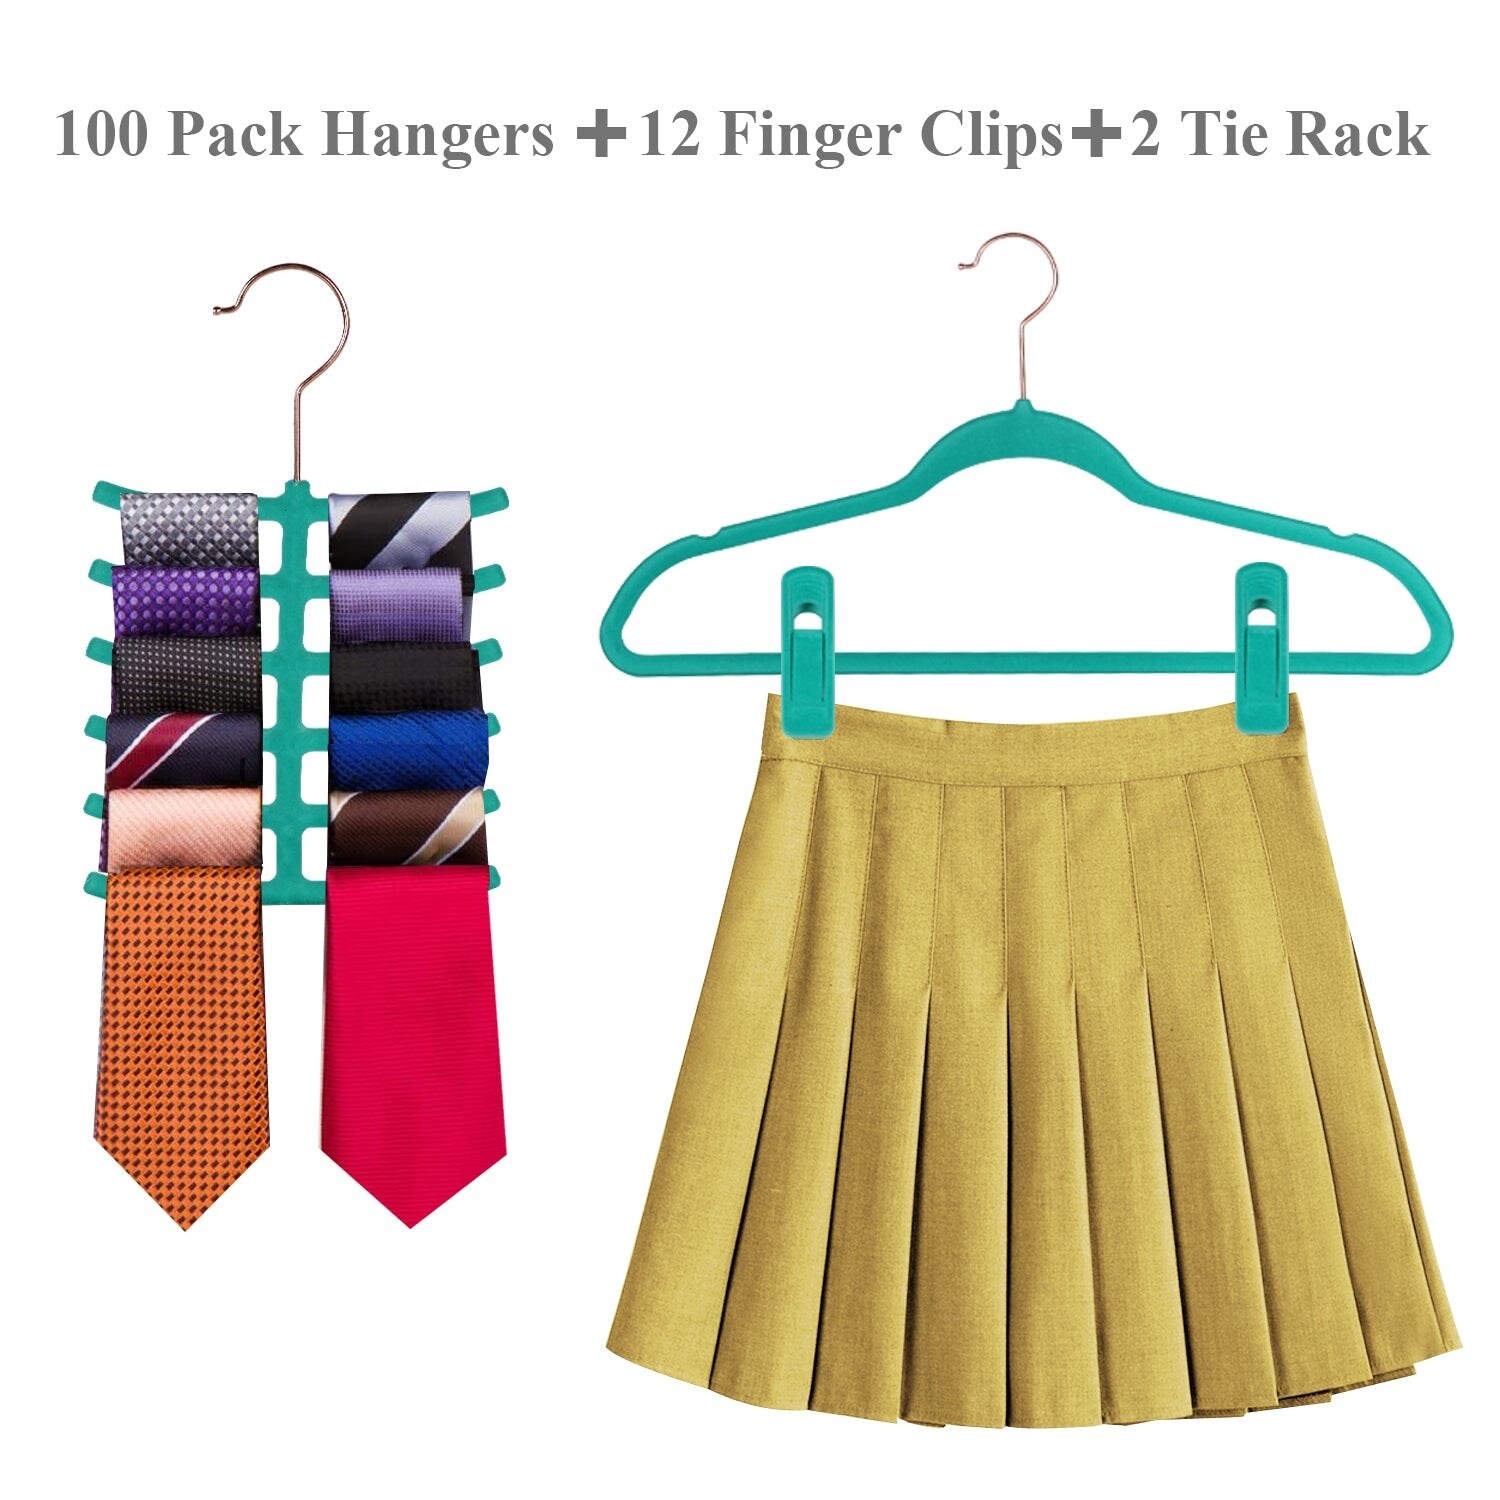 https://ak1.ostkcdn.com/images/products/is/images/direct/08e2a6511bbbefdbc88c2df17c1add59e9a6877b/Premium-Space-Saving-Velvet-Hangers-Holds-Up-To-10-Lbs%2850-100-Packs-Option%29.jpg